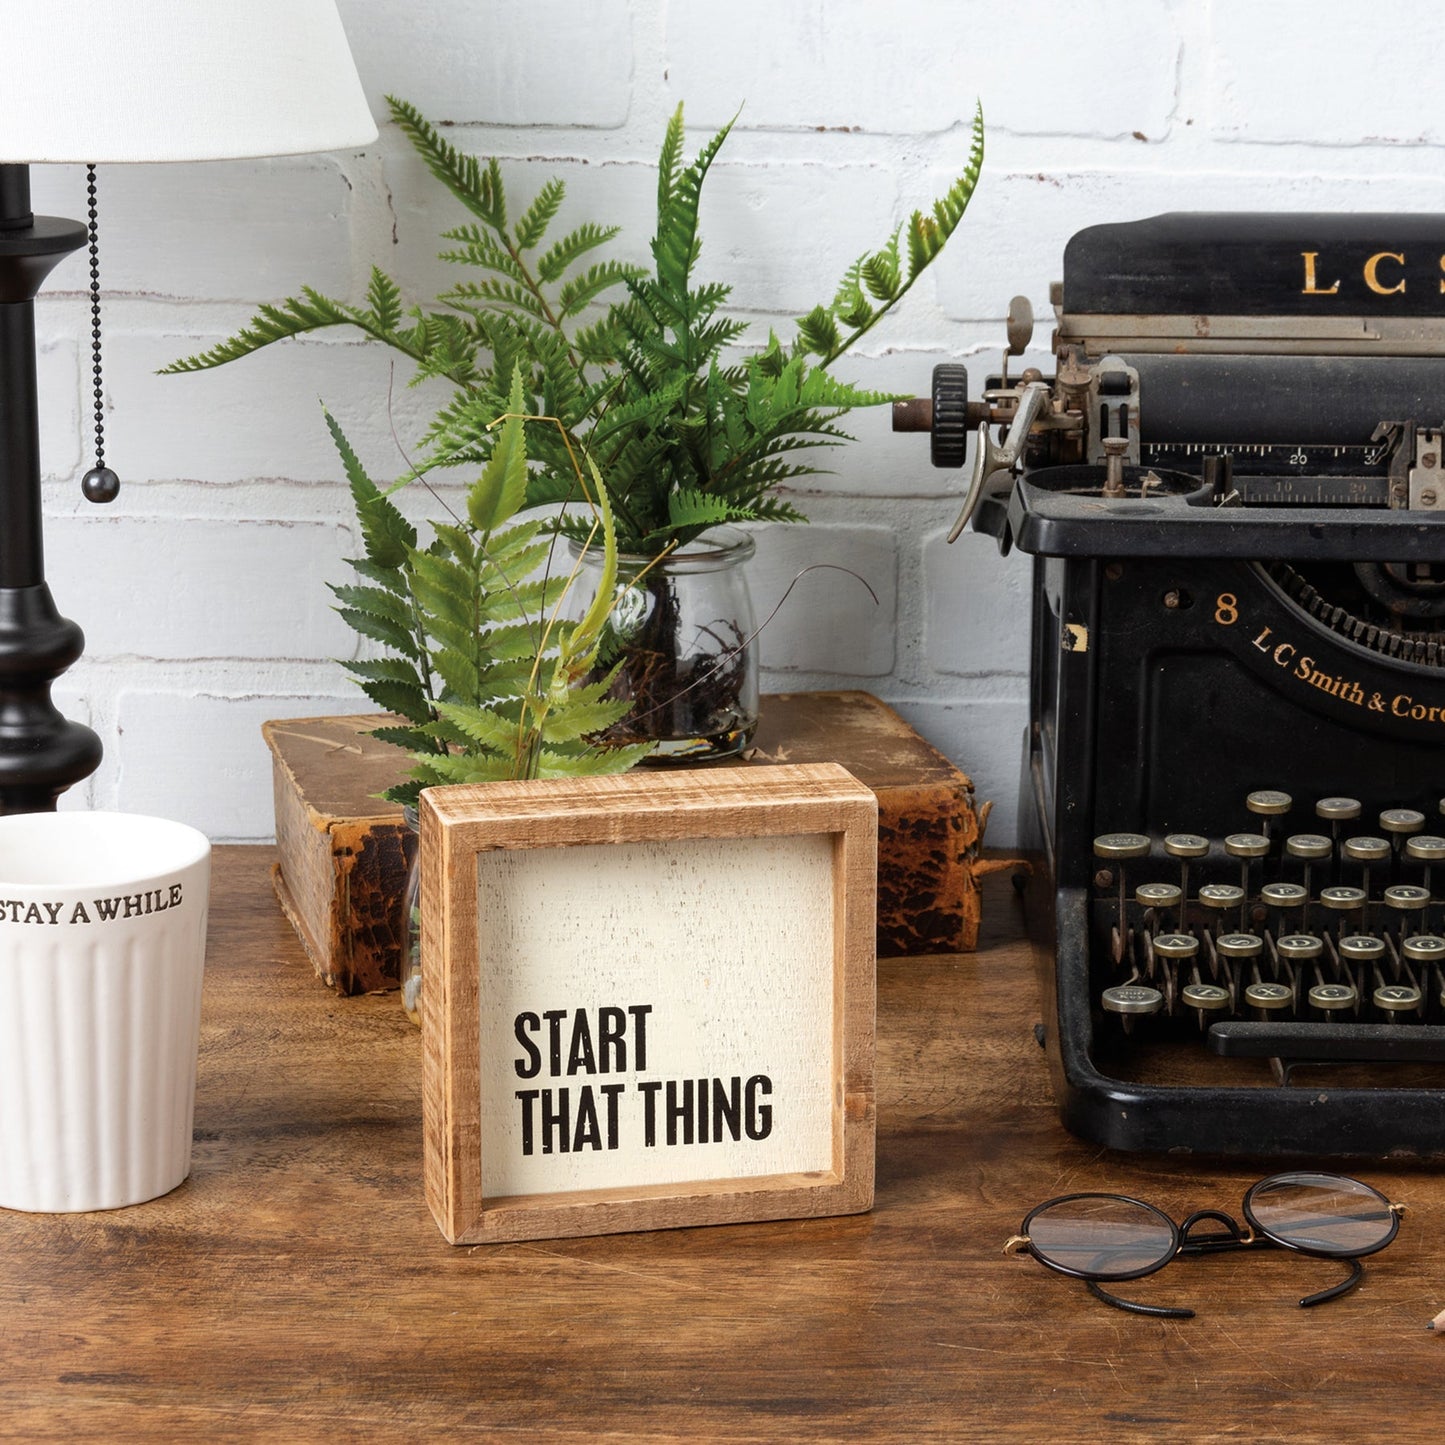 Start That Thing Wooden Inset Box Sign | Rustic Farmhouse